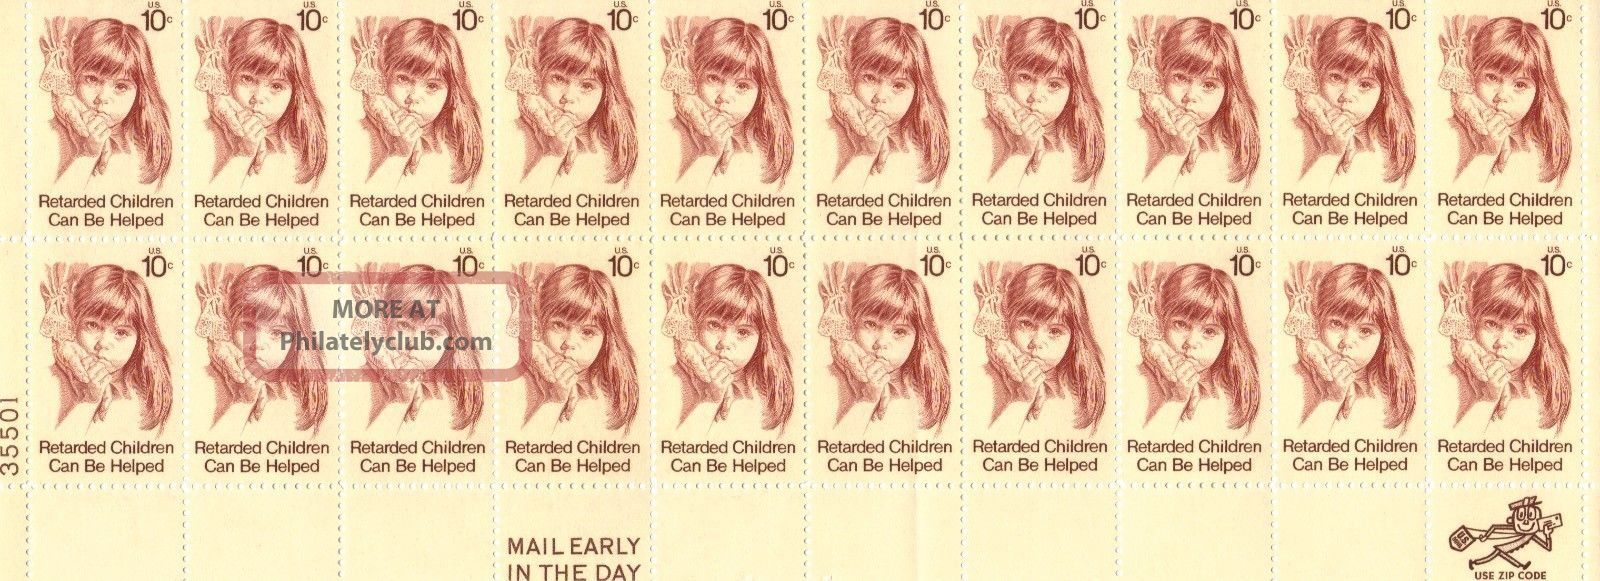 Us Stamp Sheet Scott 1549 1974 10 Cent 20 Count Retarded Children Can Be Helped United States photo